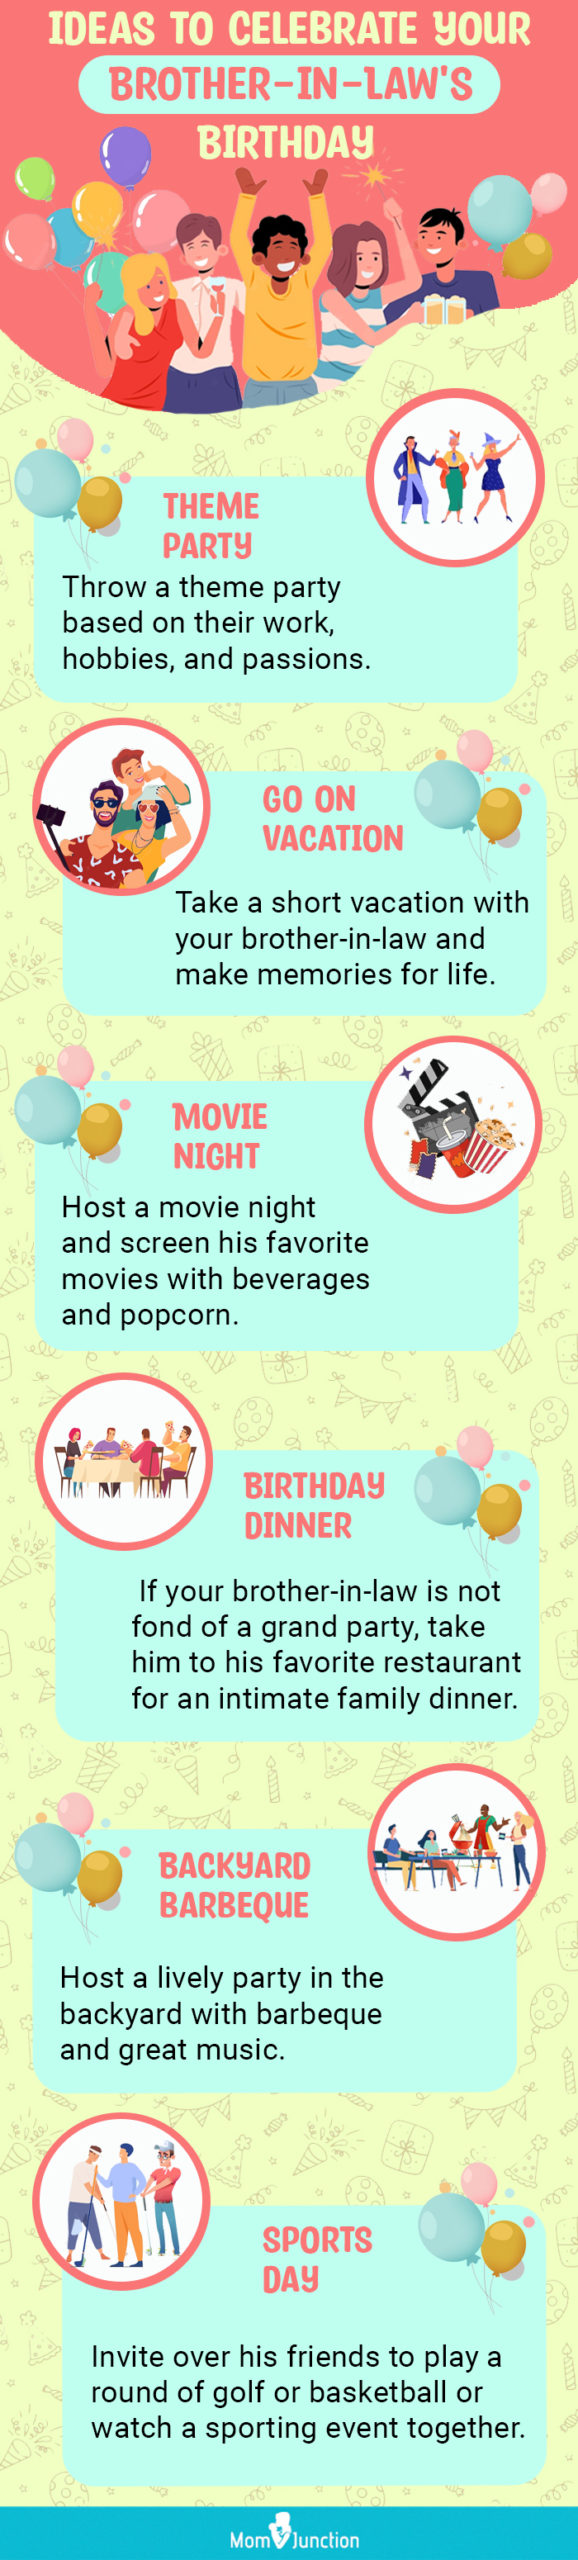 birthday celebration ideas for brother-in-law [infographic]